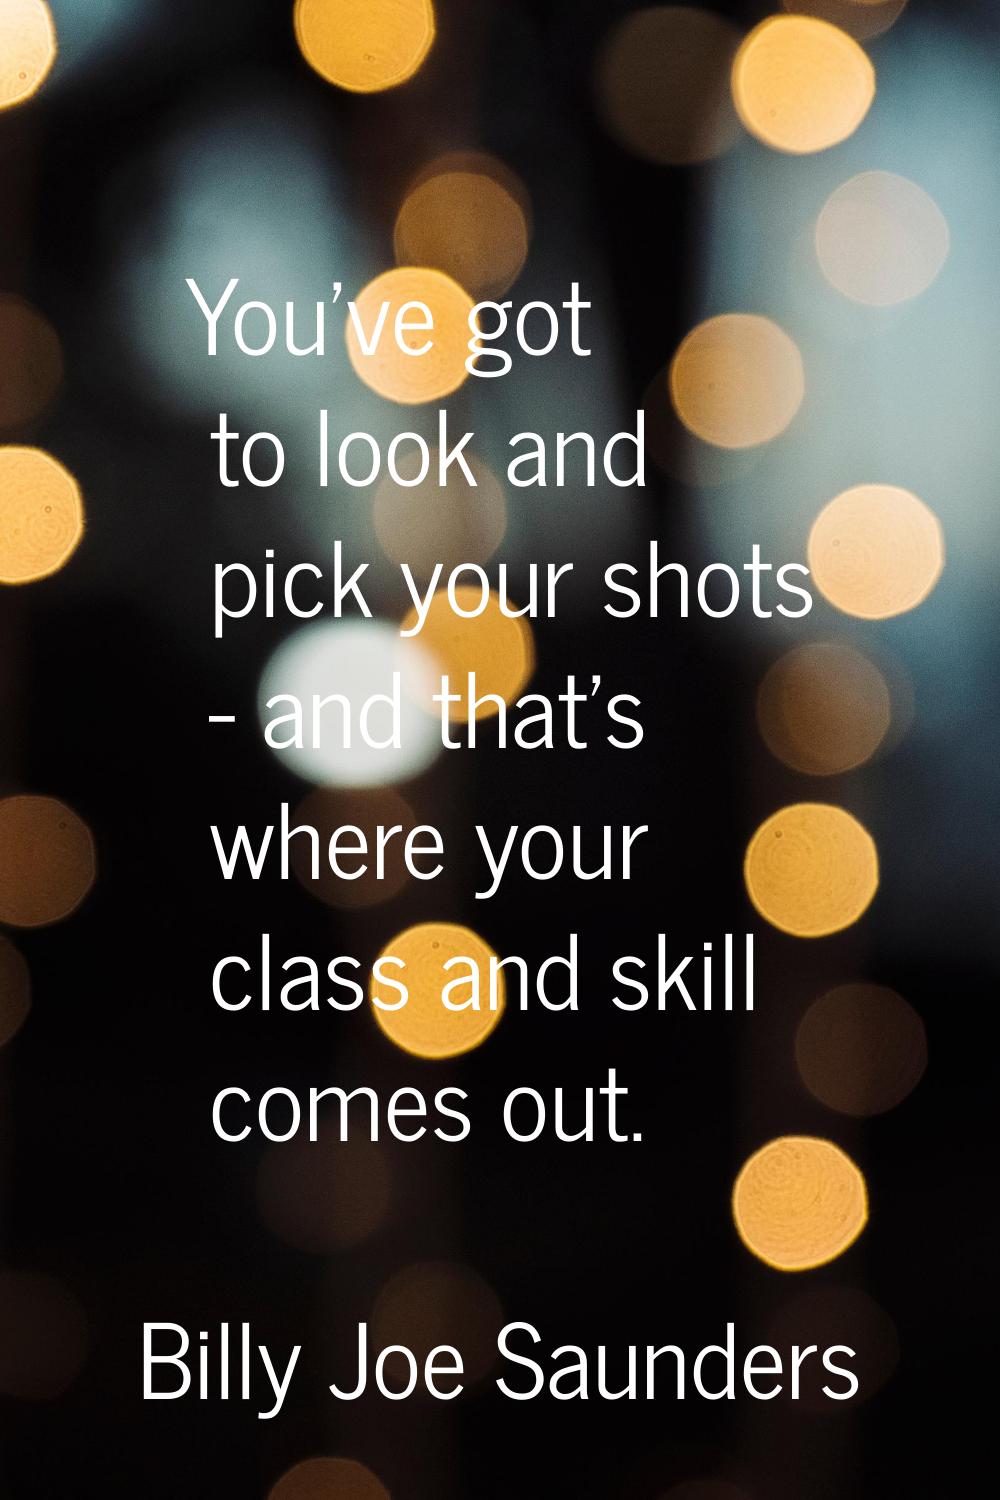 You've got to look and pick your shots - and that's where your class and skill comes out.